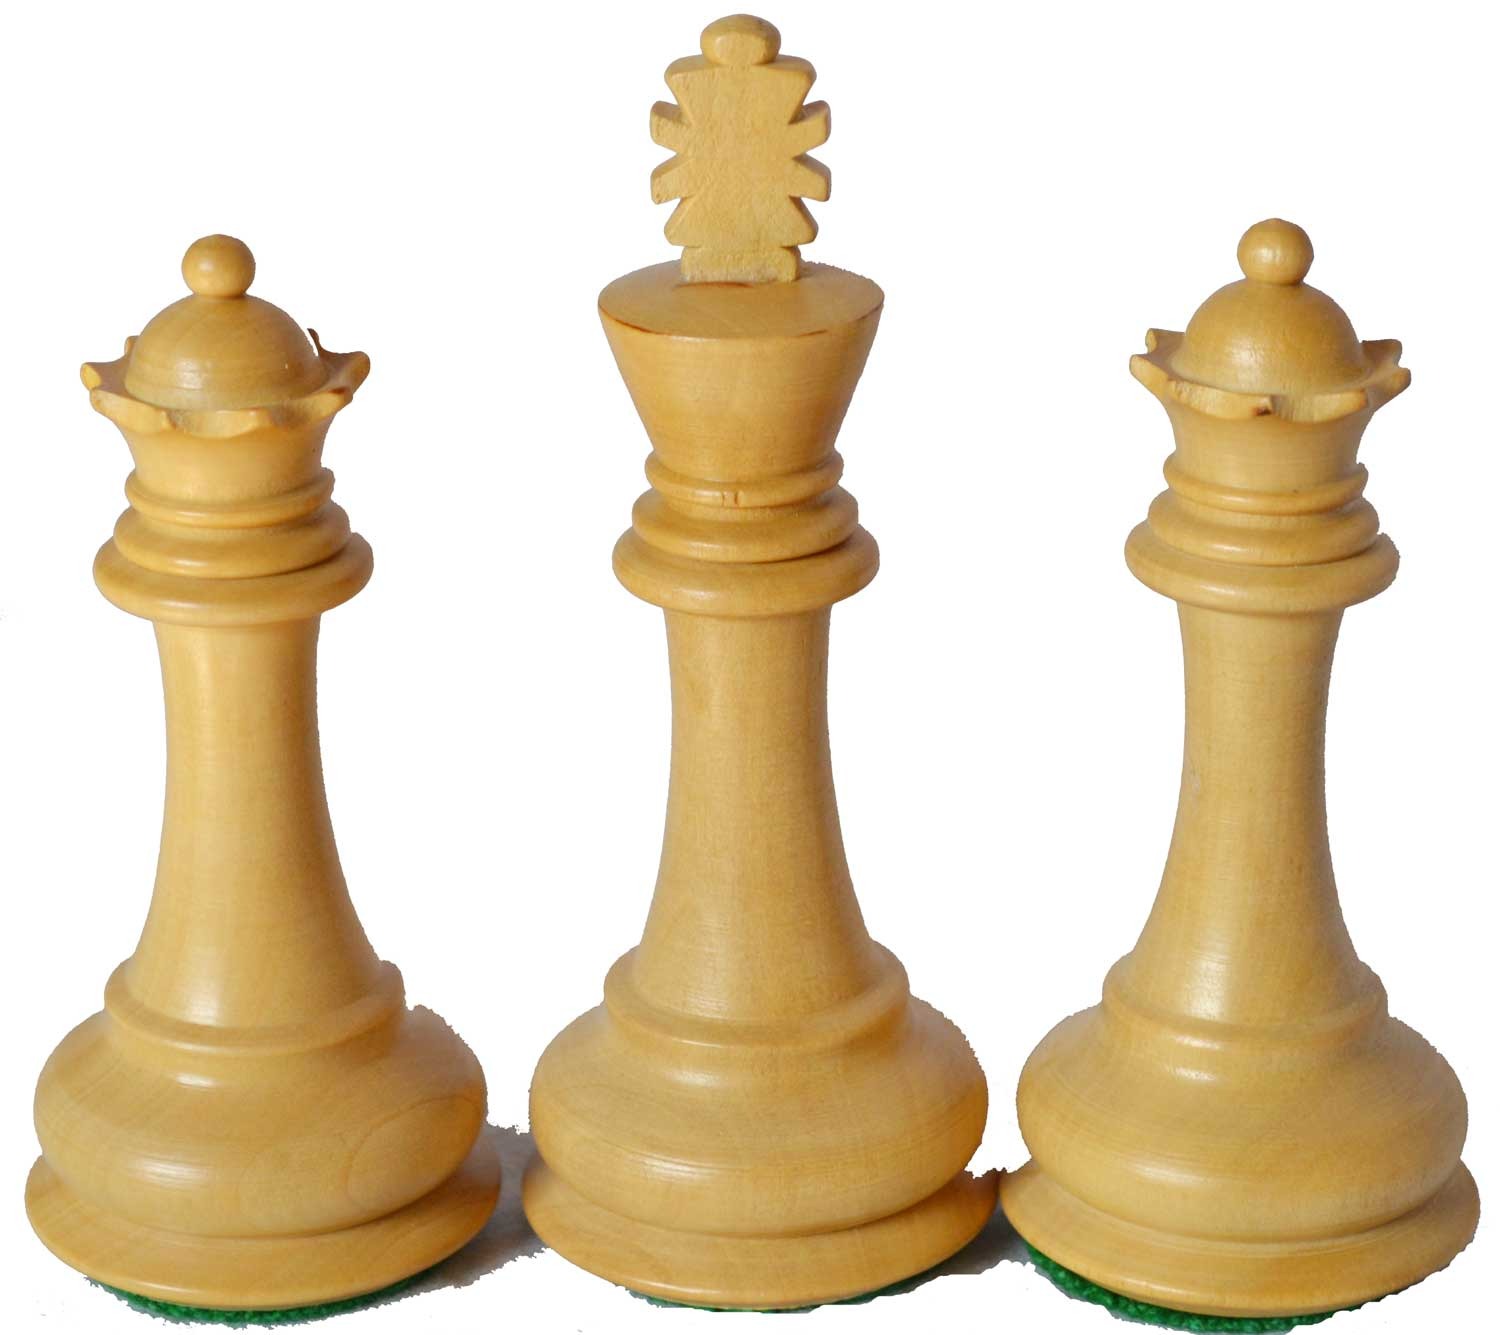 Azacus Brand Wooden Double Weighted Burn Design Chess Set King Height 3.9" 34pcs